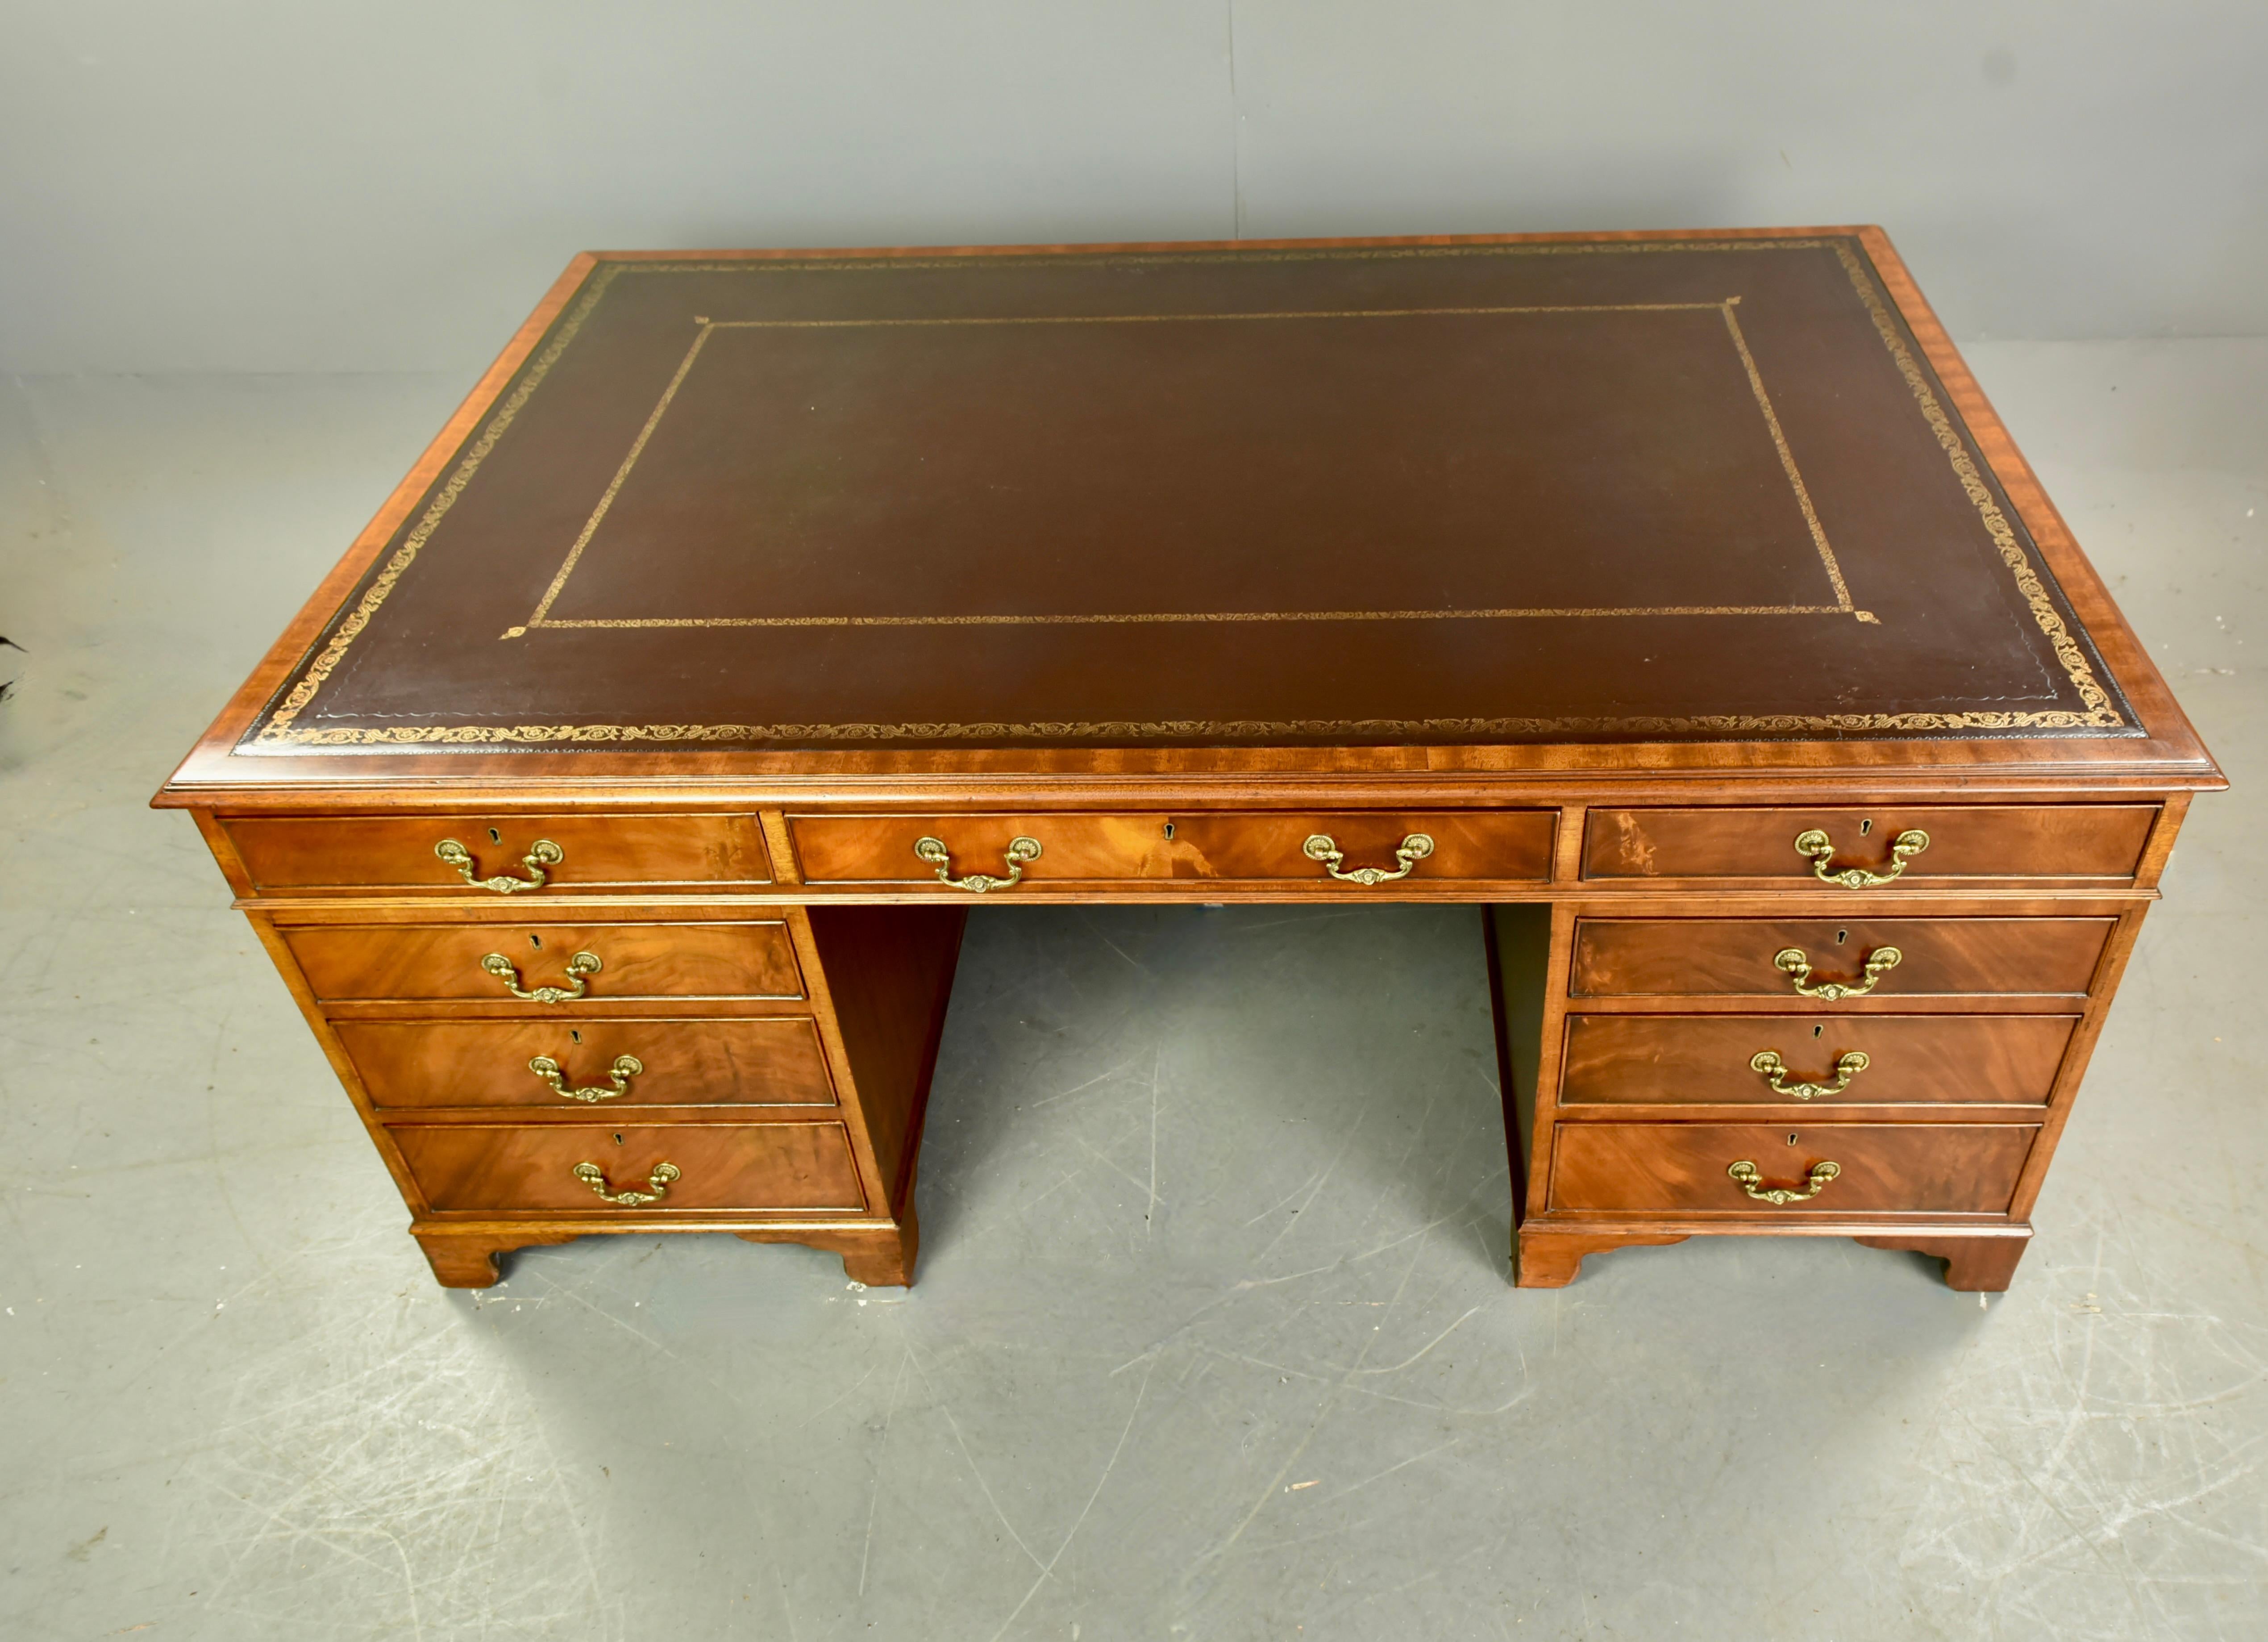 Large mahogany partners desk circa 1920 .with Provenance: The desk was once owned by Sir Maurice Hodgson (British 1919-2014) He was most famous for being the chairman of chemical giant ICI from 1978-1982. He was also chairman of British Home Stores